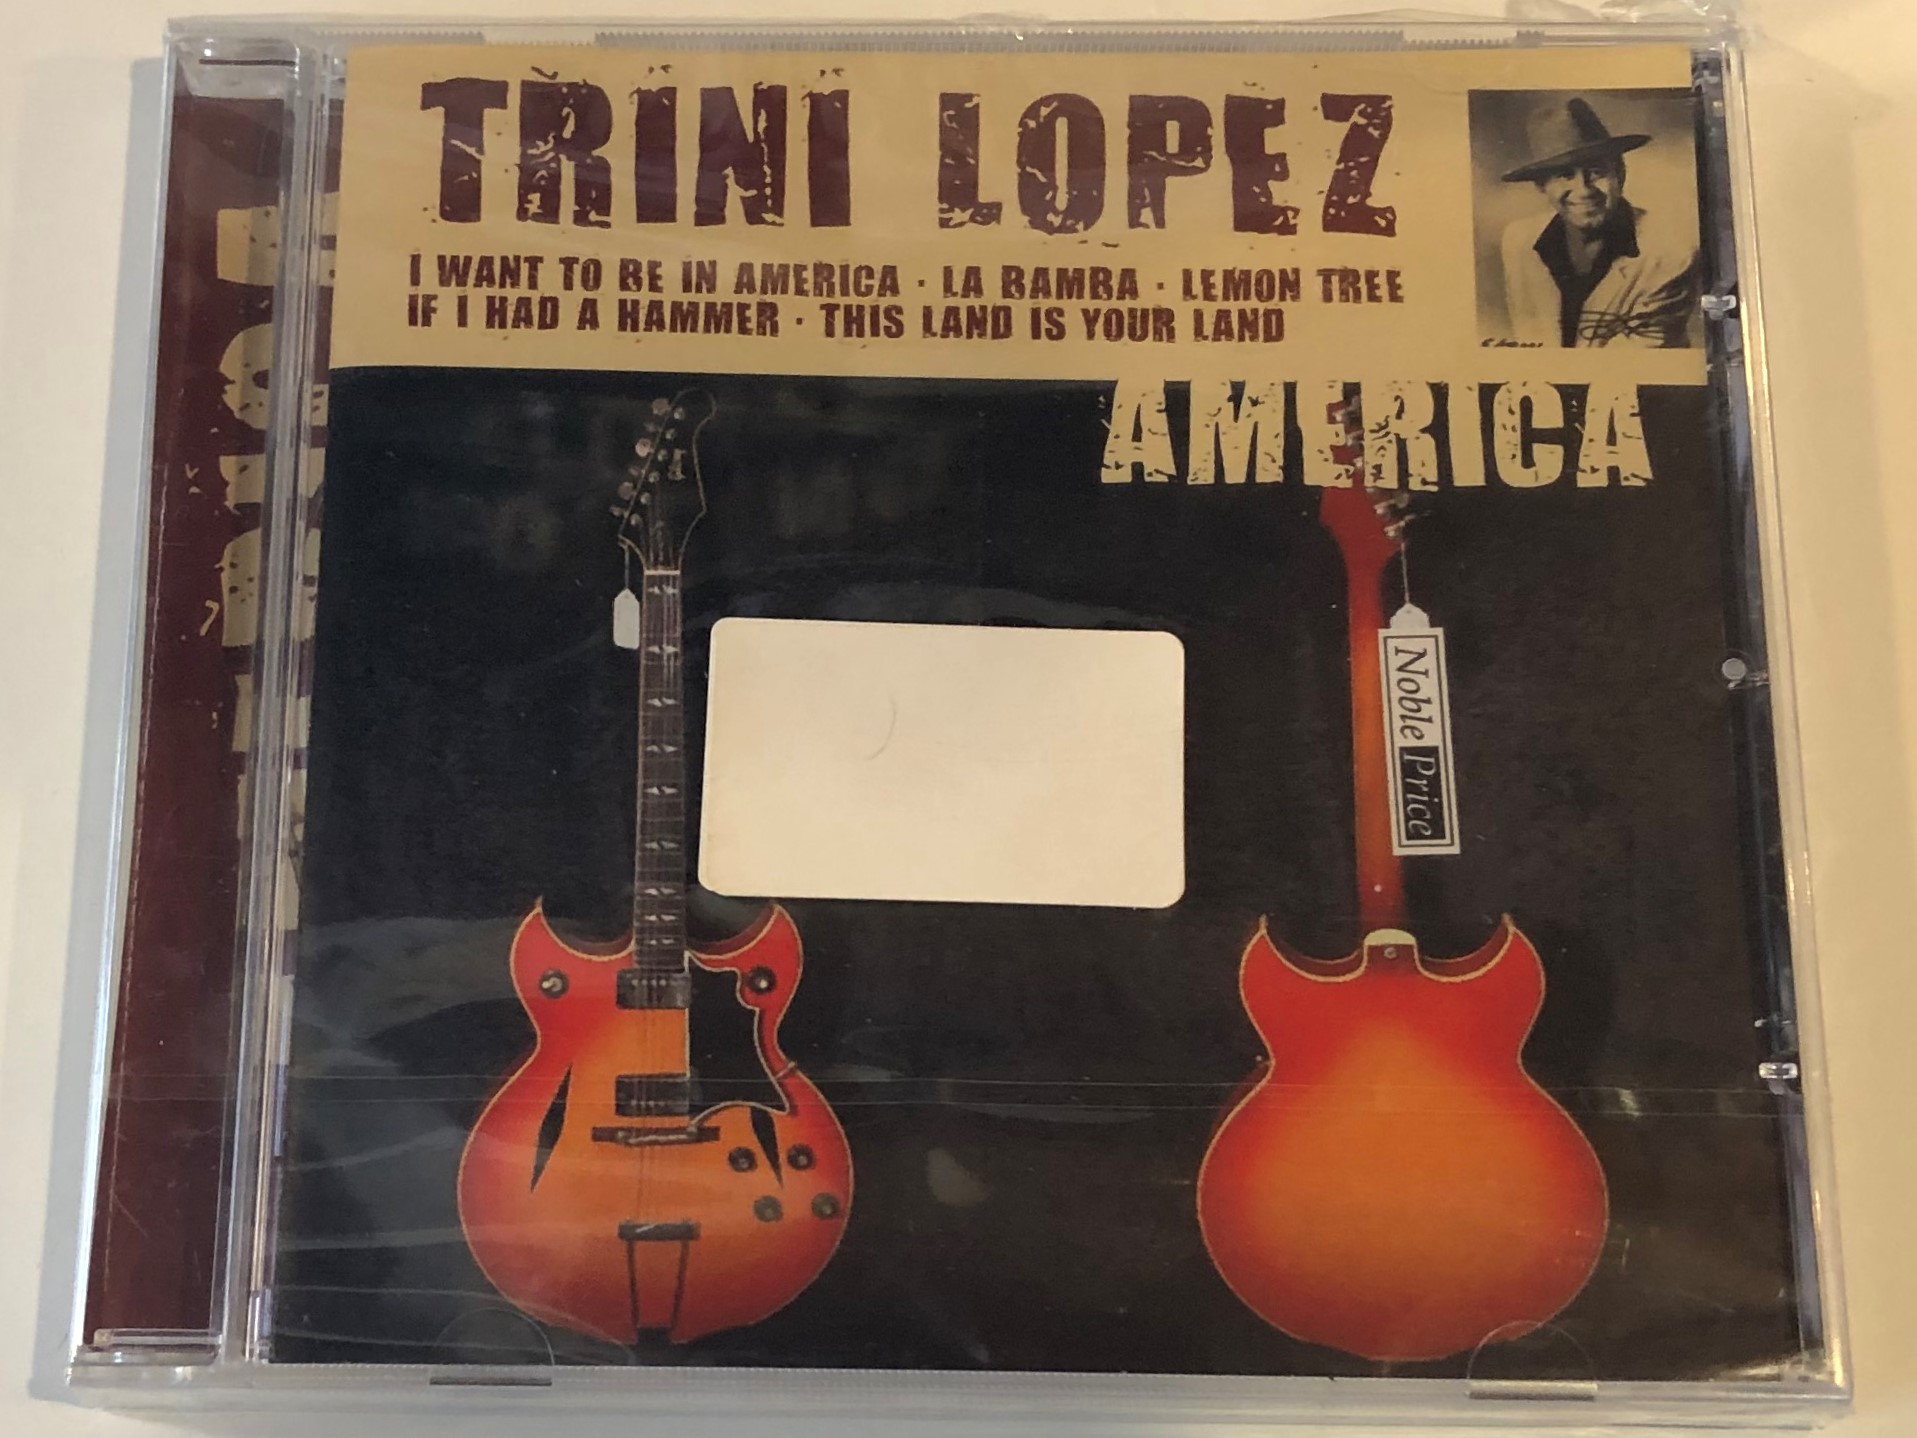 trini-lopez-america-i-want-to-be-in-america-la-bamba-lemon-tree-if-i-had-a-hammer-this-land-is-your-land-membran-international-gmbh-audio-cd-2004-222097-205-1-.jpg